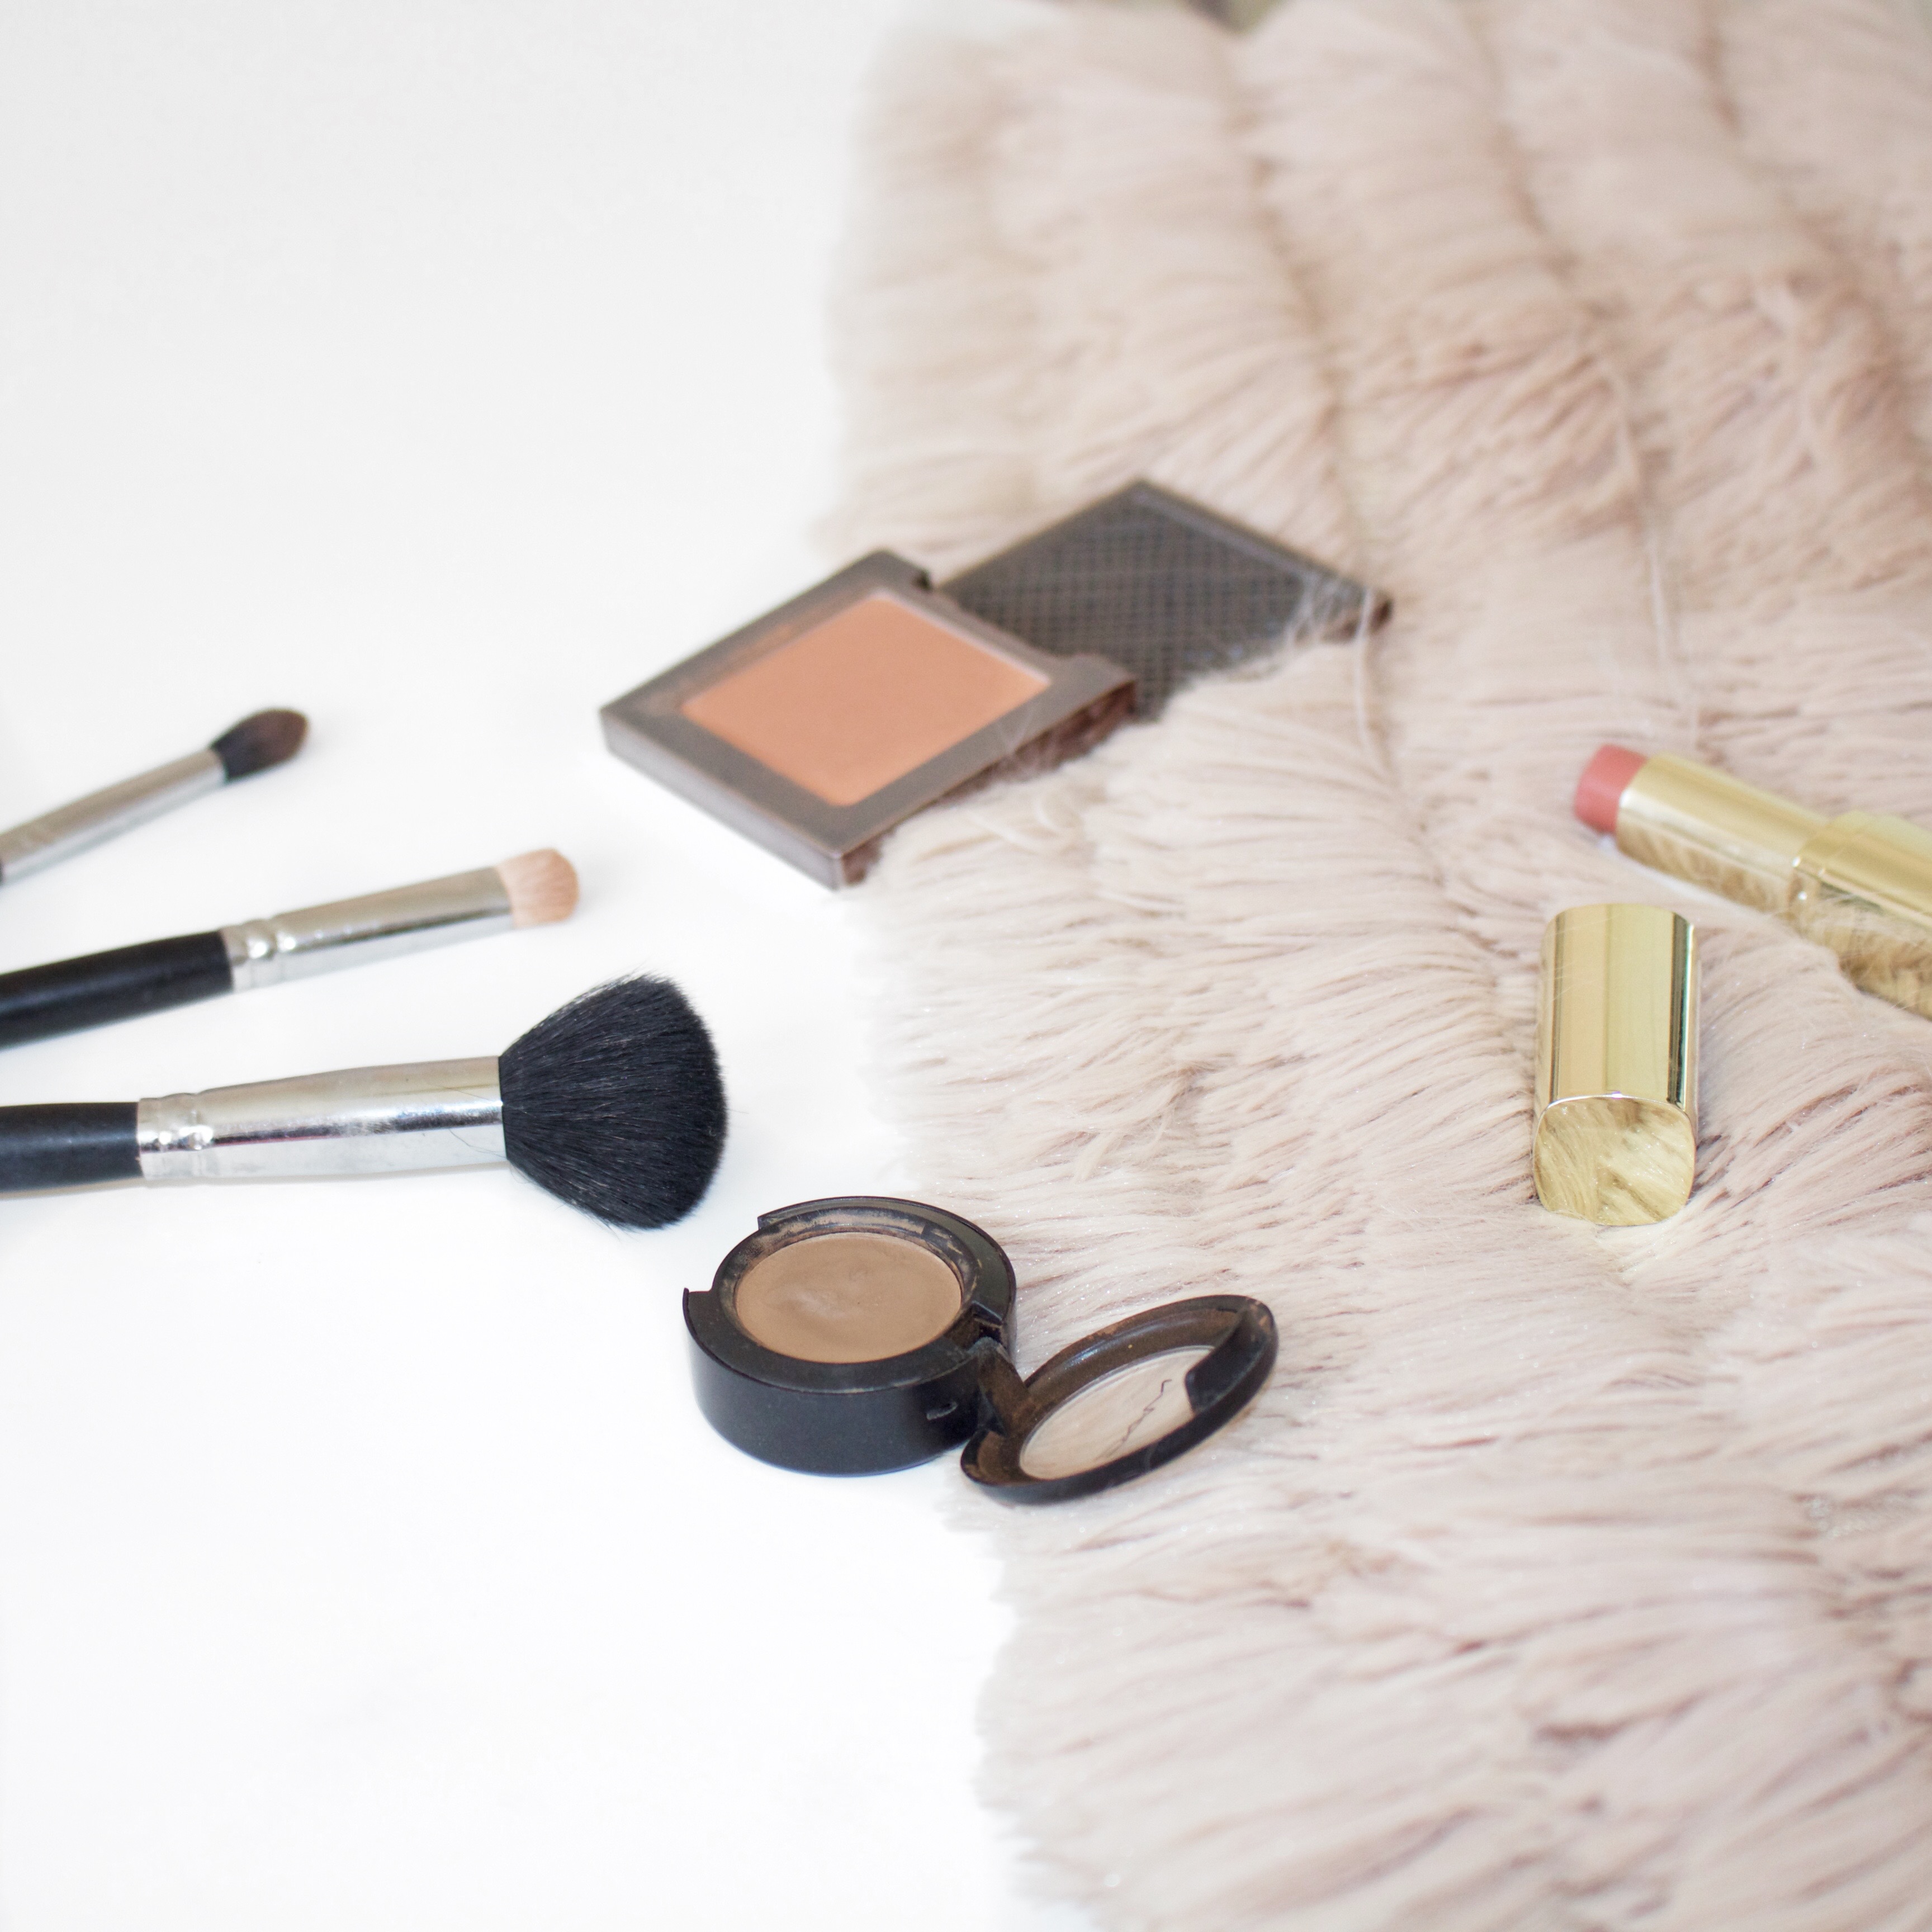 Fall Beauty Products - My Styled Life